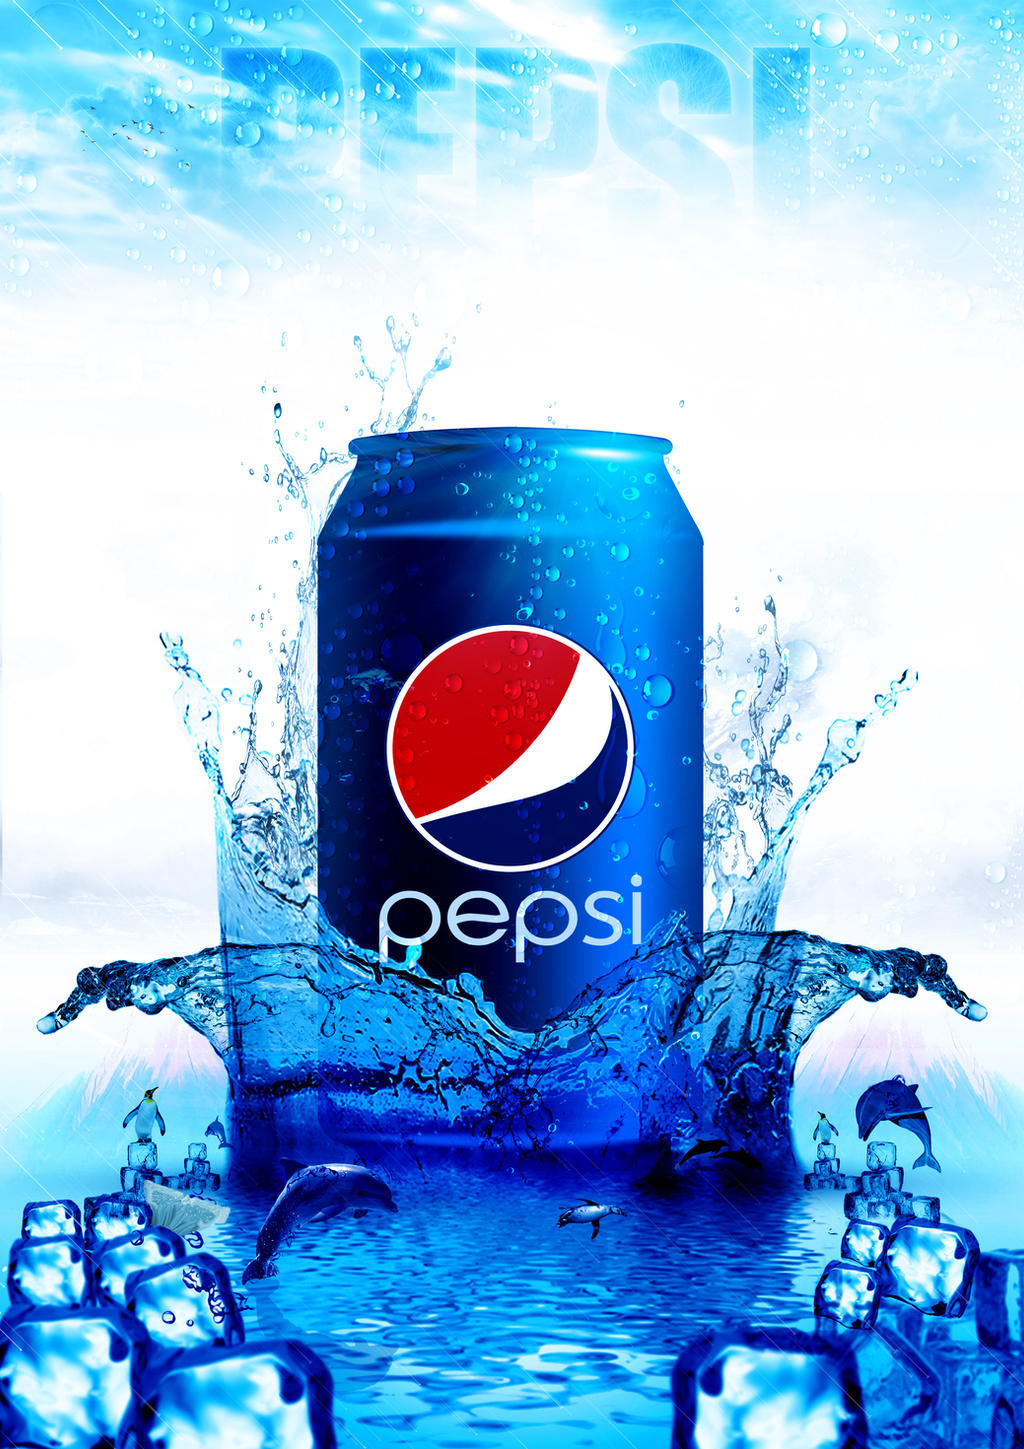 Pepsi Poster by AhmedAlmabdi on DeviantArt